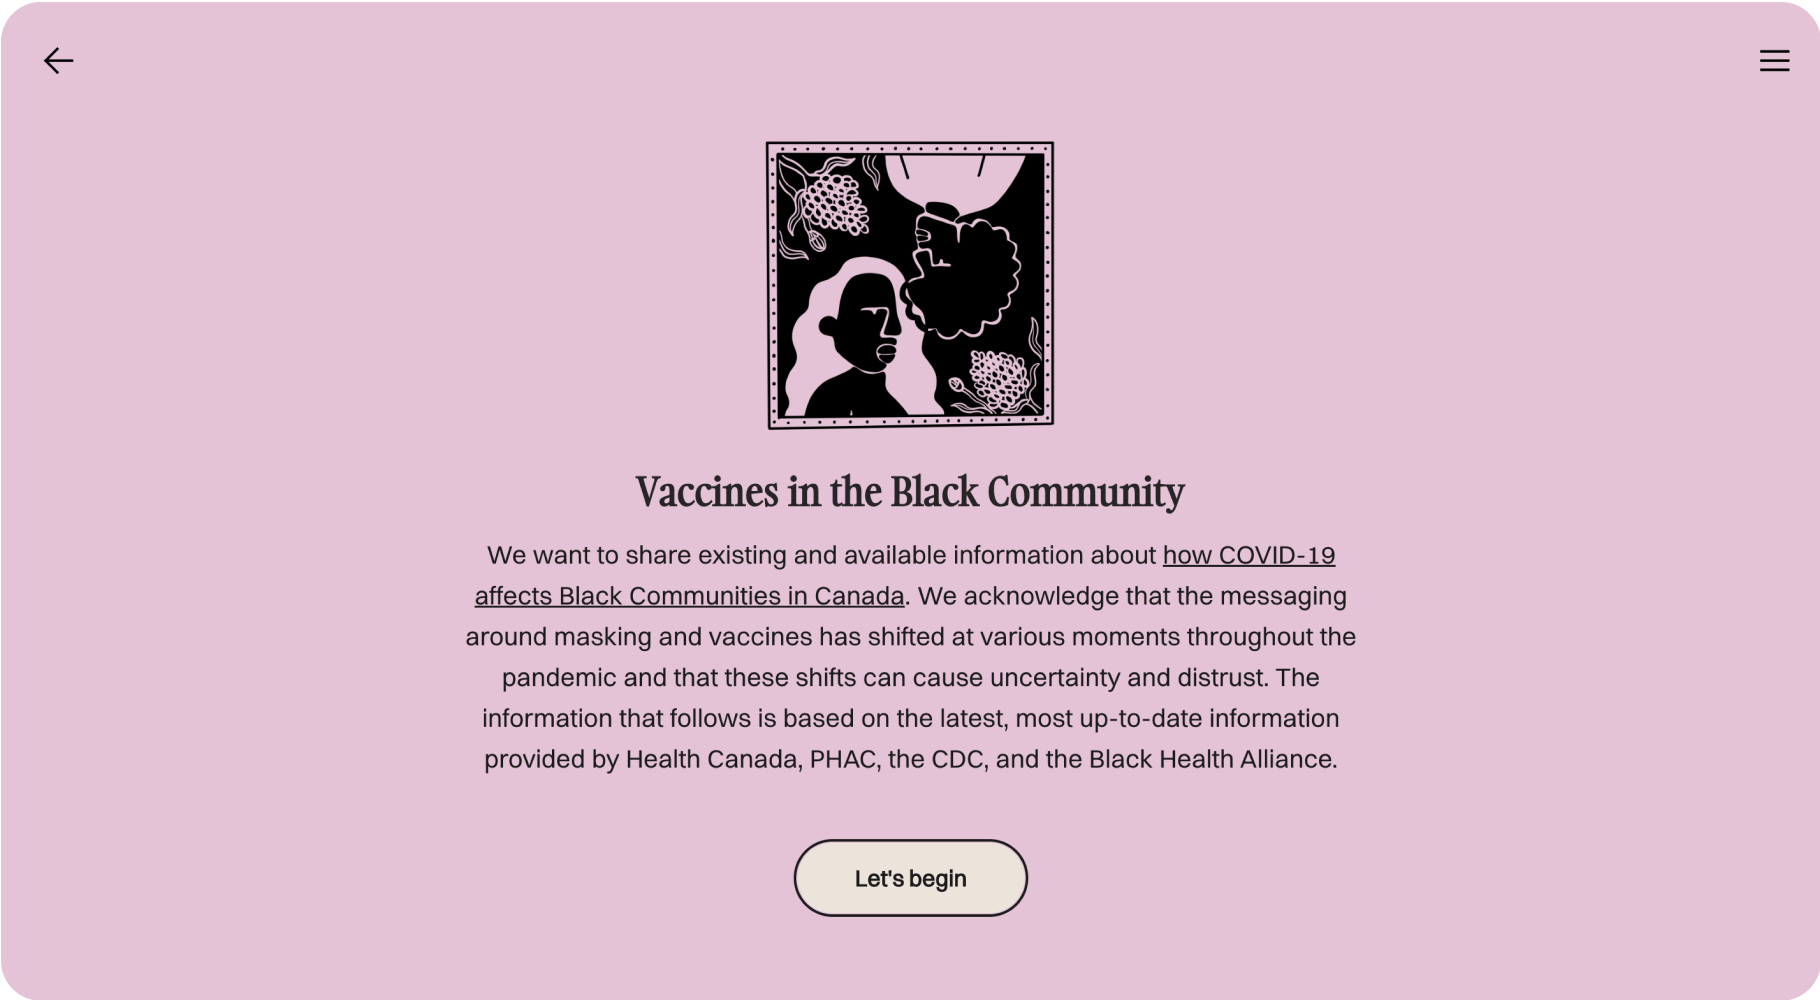 A topic landing screen with a header that reads "Vaccines in the Black Community".